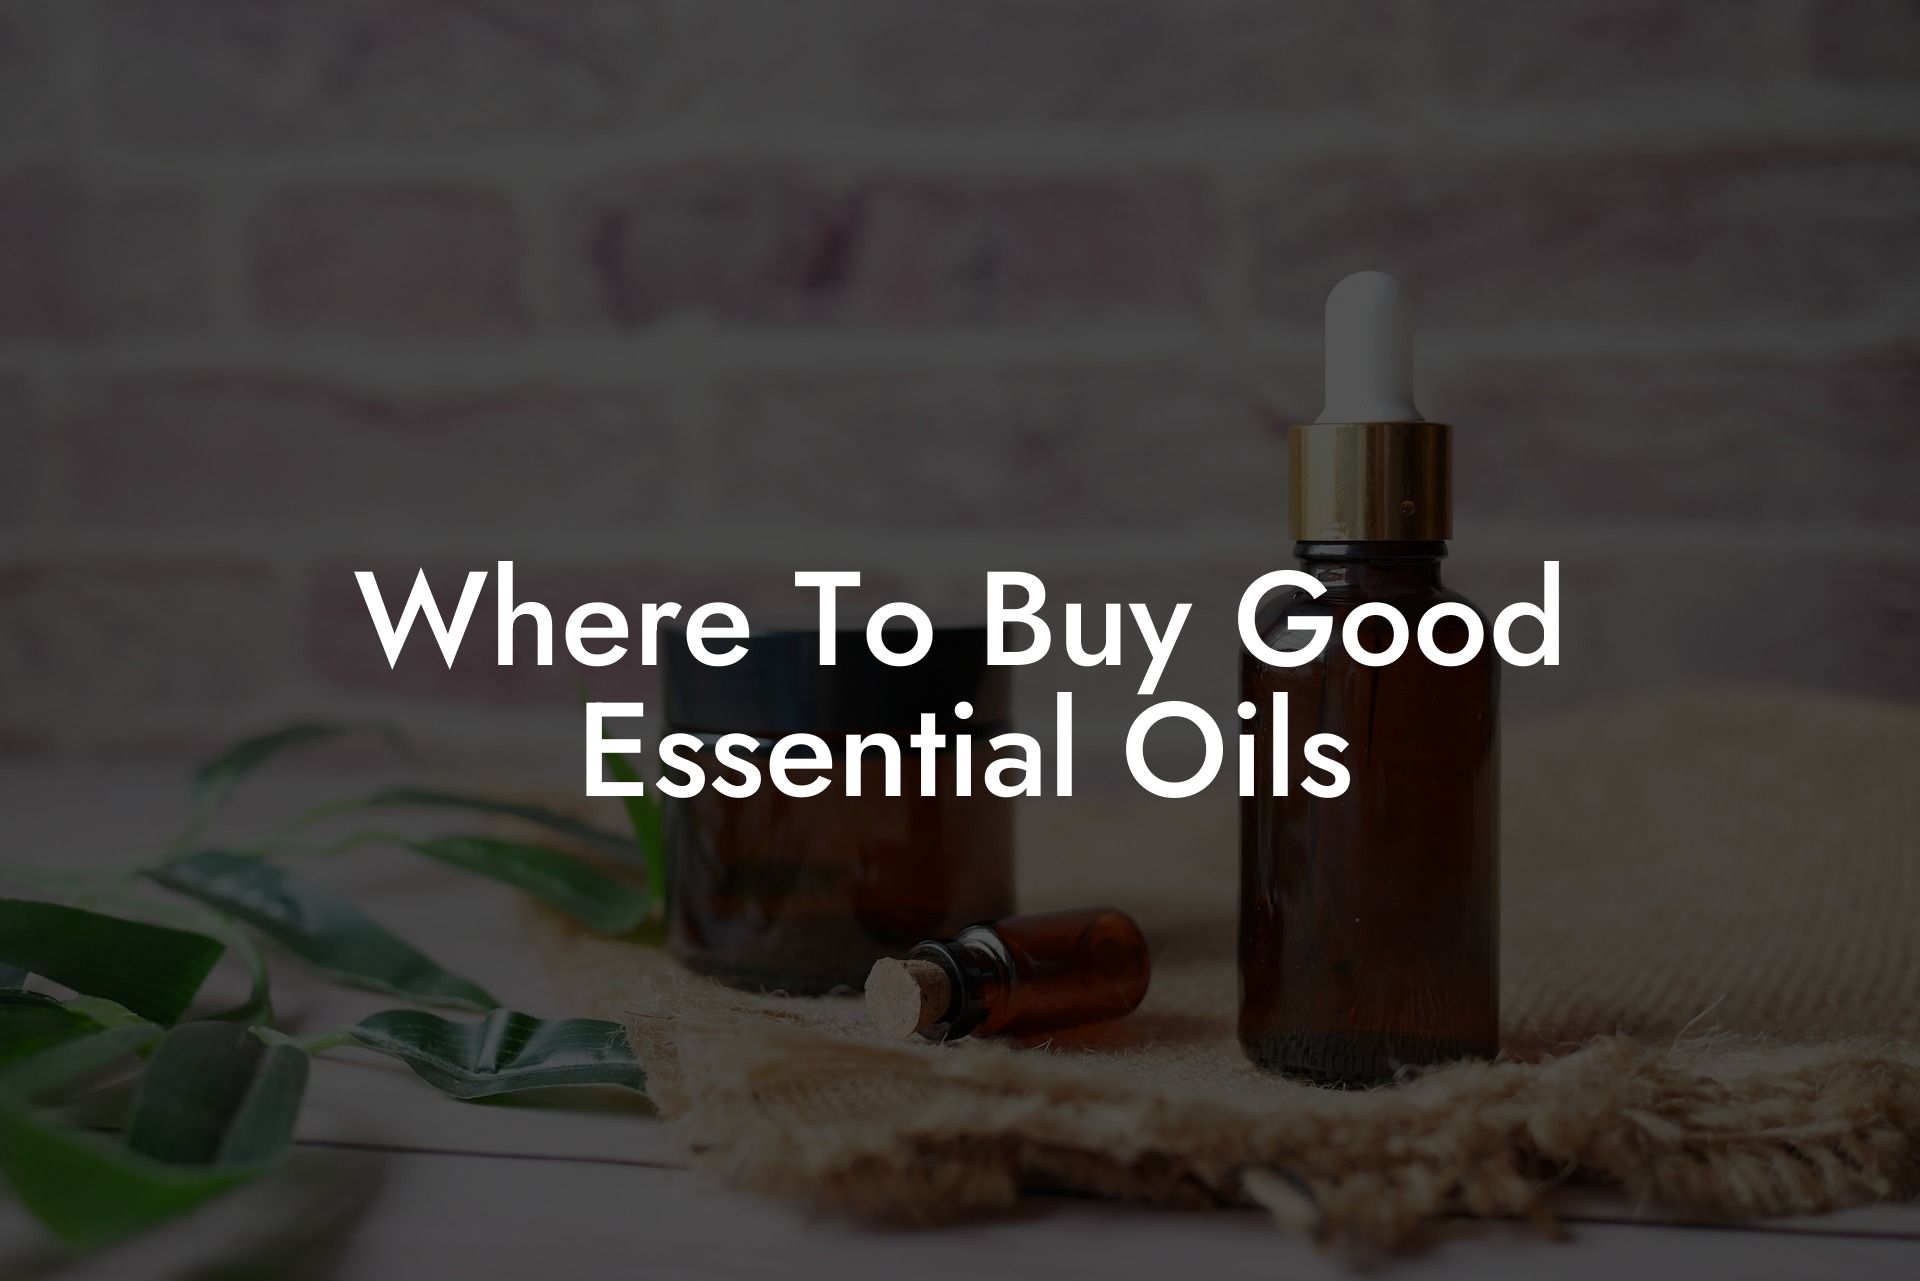 Where To Buy Good Essential Oils